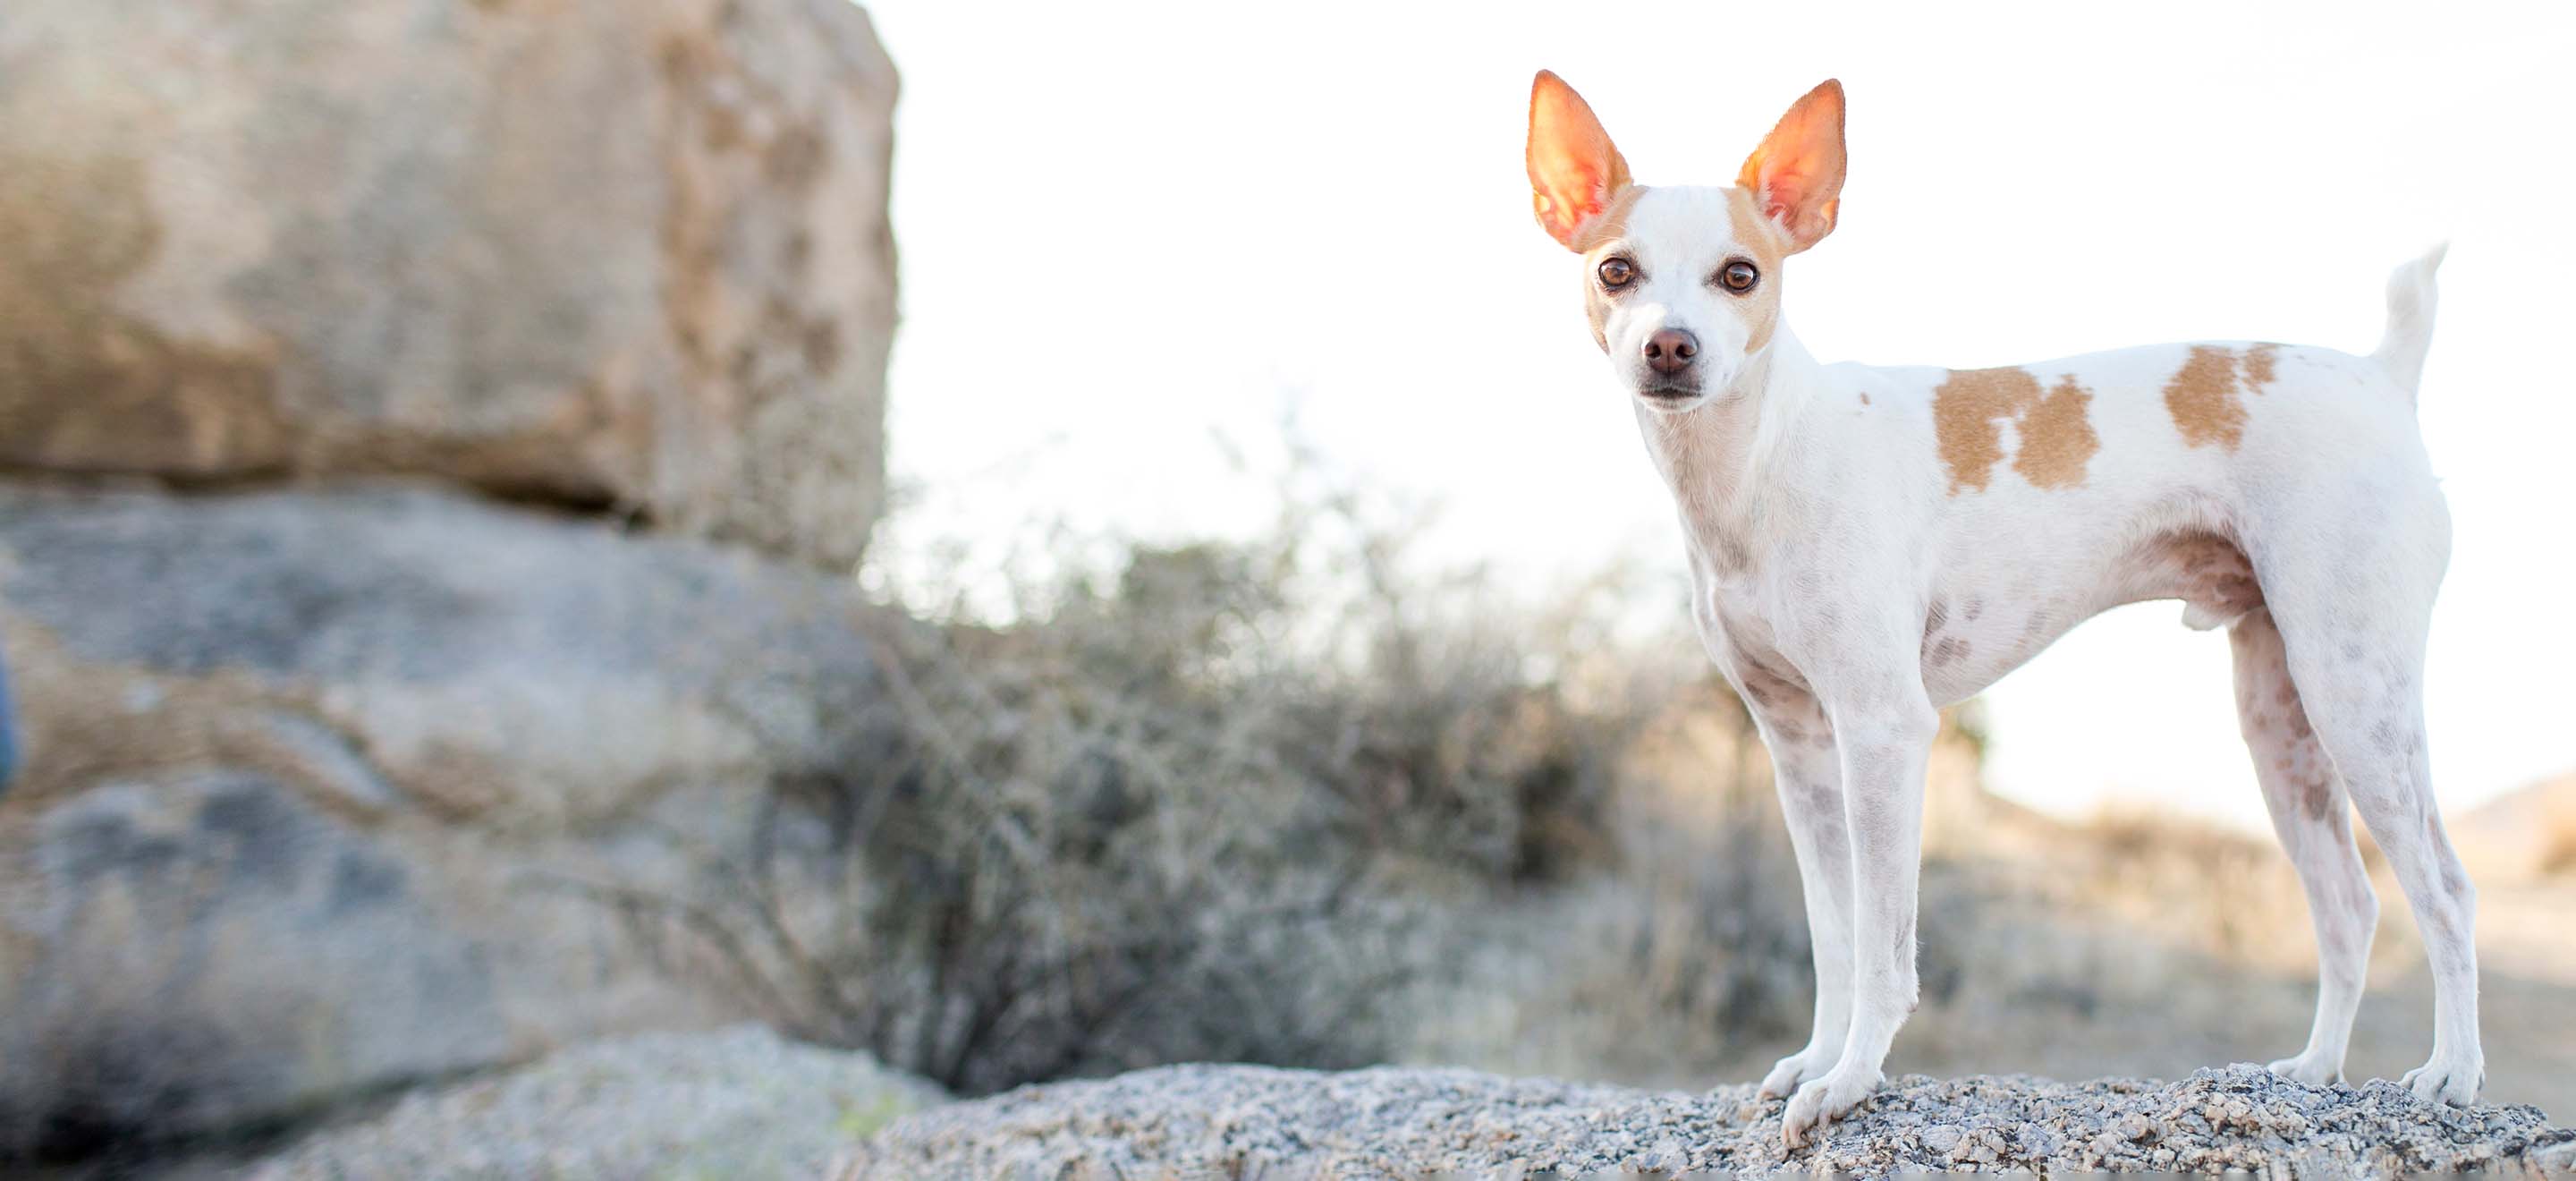 A white Feist rat terrier dog with tan spots standing on a gravel path on a nature hike image